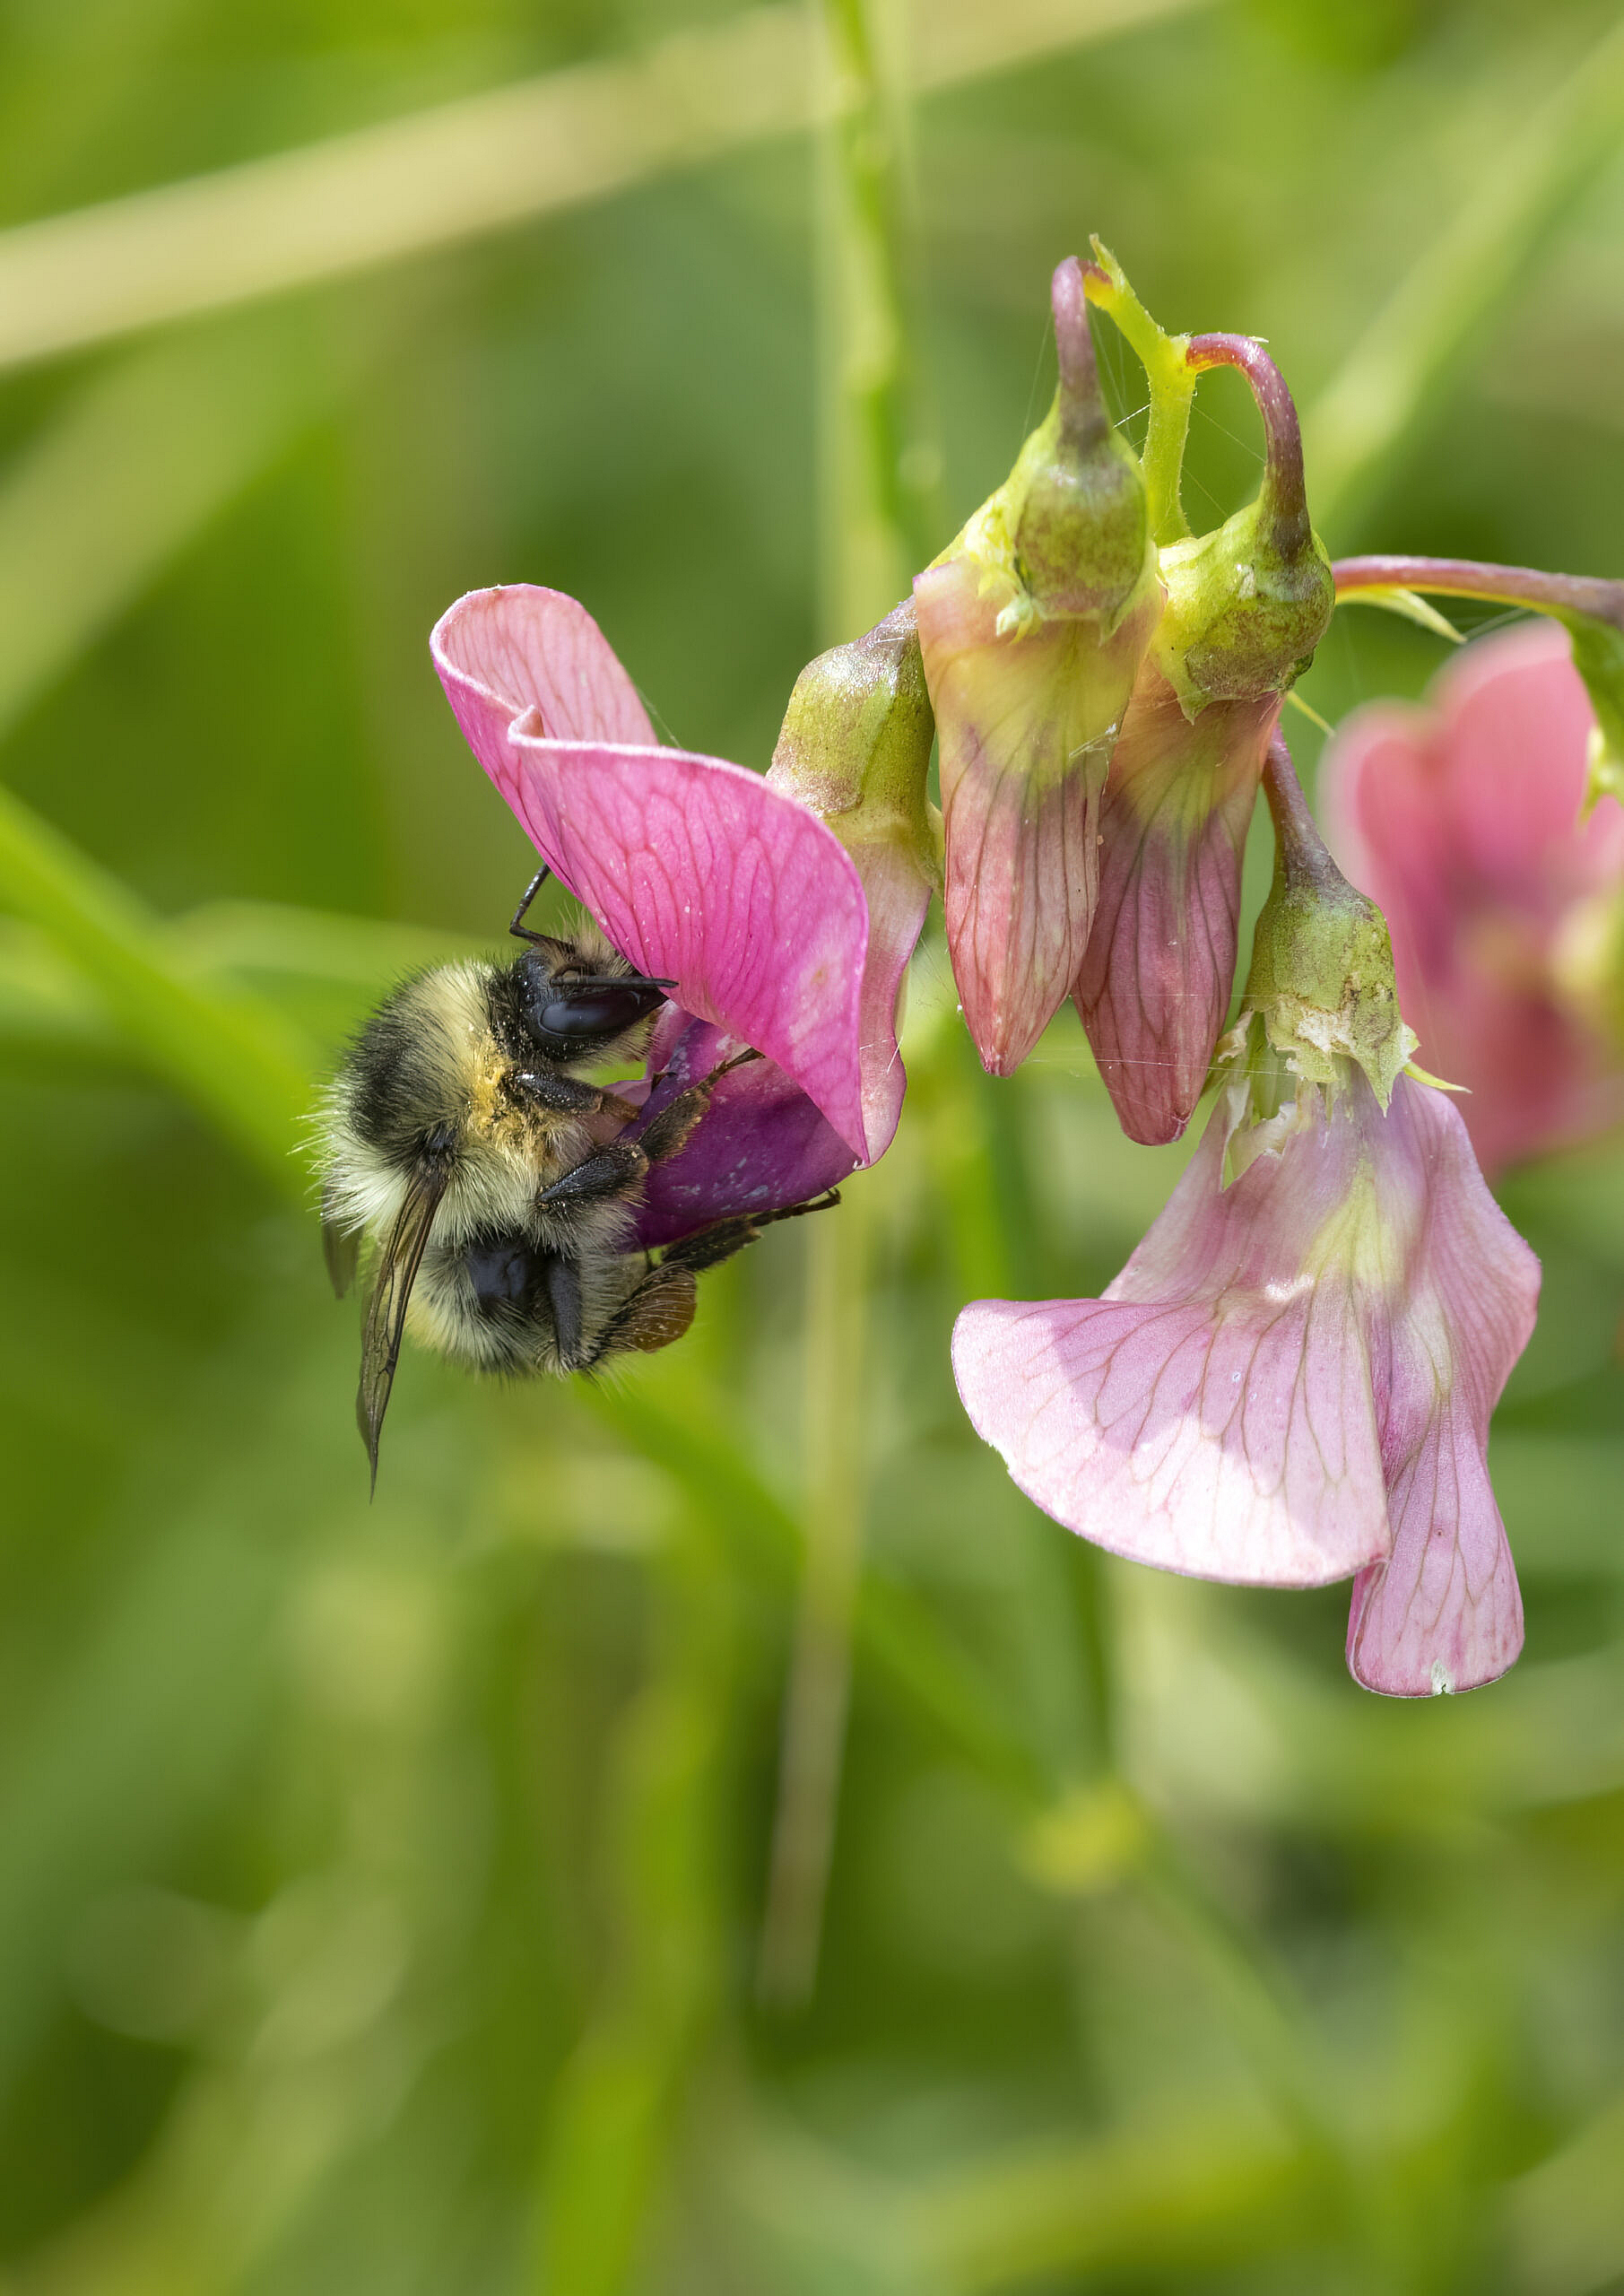 The shrill carder bee